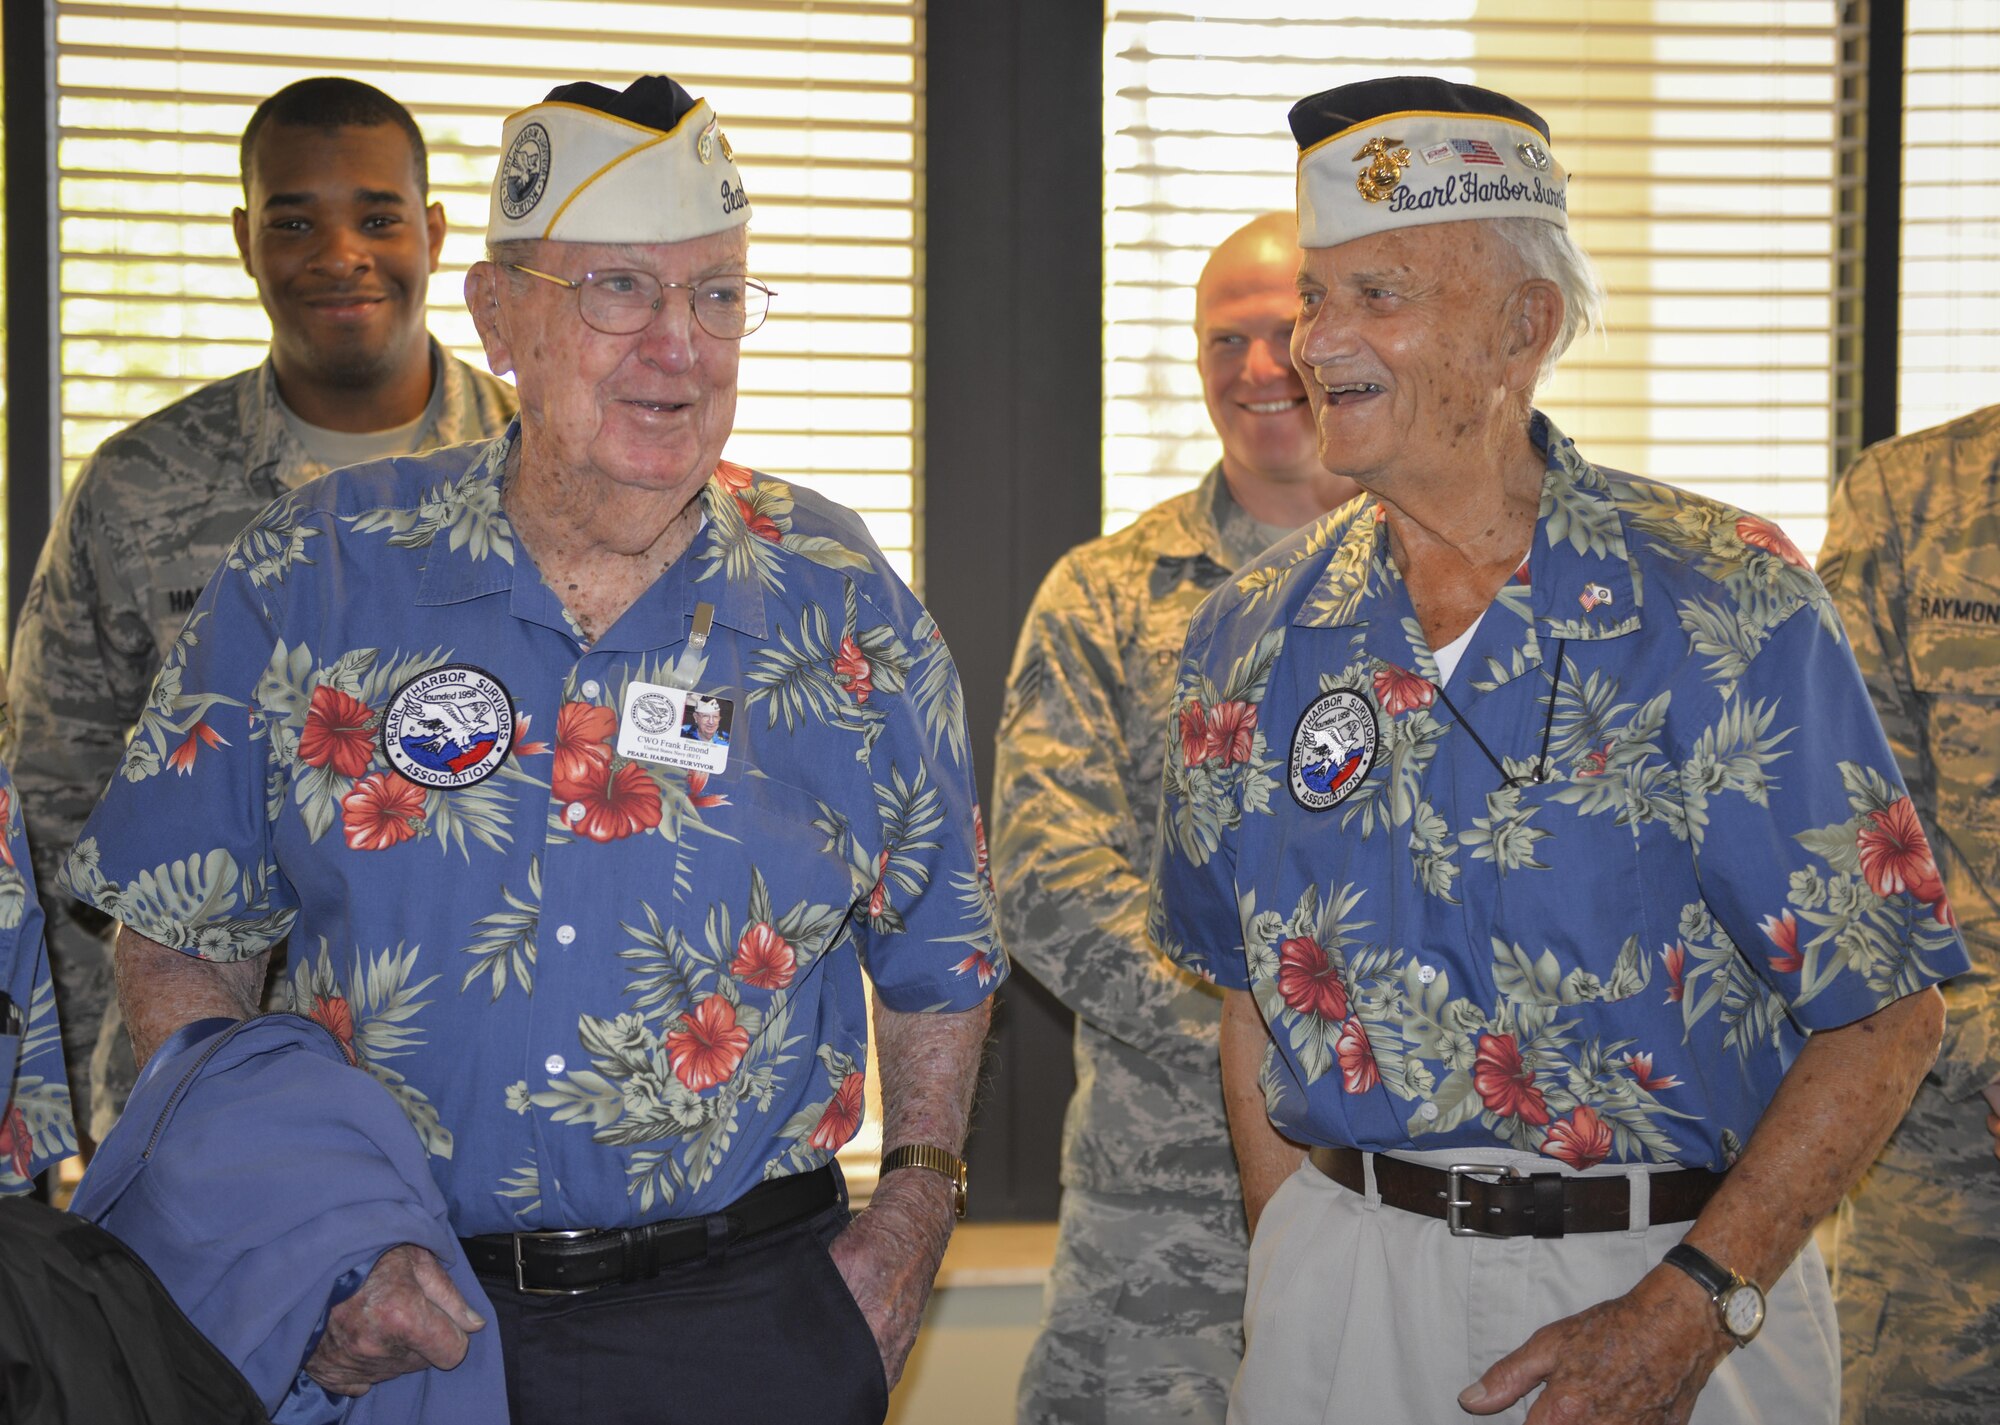 Retired U.S. Navy Chief Warrant Officer 4 Francis Edmond, left, and retired U.S. Marine Sgt. Maj. Bill Braddock, Pearl Harbor survivors, chat with Air Commandos during lunch at the Riptide Dining Facility at Hurlburt Field, Fla., April 5, 2016. During a base tour, Edmond, Braddock and two fellow Pearl Harbor survivors spent time with Air Commandos to discuss their experiences and the differences they see in today’s force. (U.S. Air Force photo by 2nd Lt. Jaclyn Pienkowski)